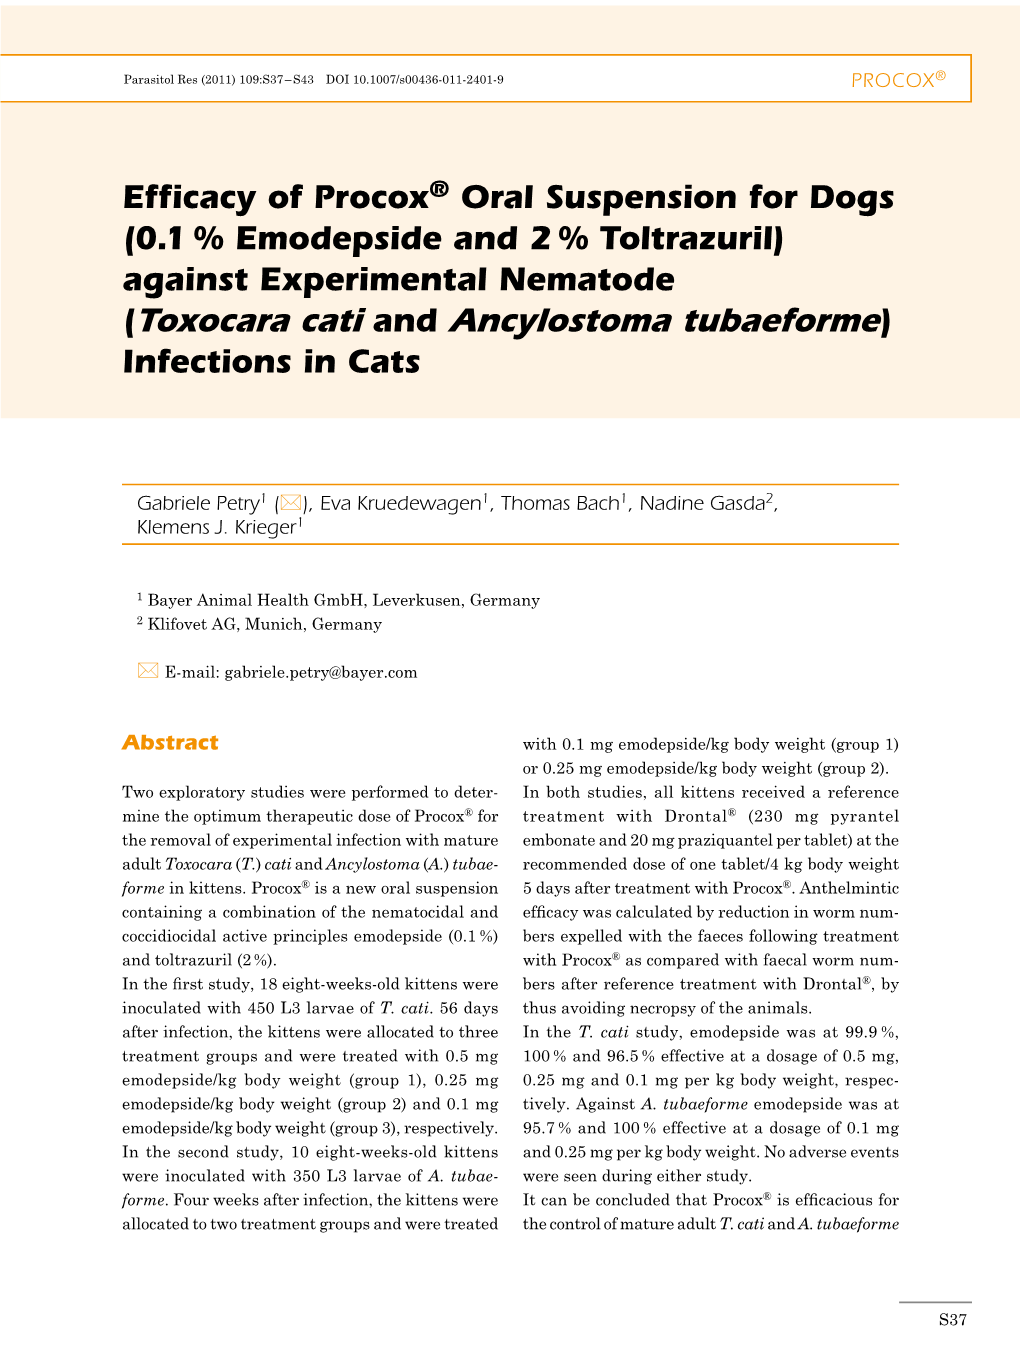 (Toxocara Cati and Ancylostoma Tubaeforme) Infections in Cats